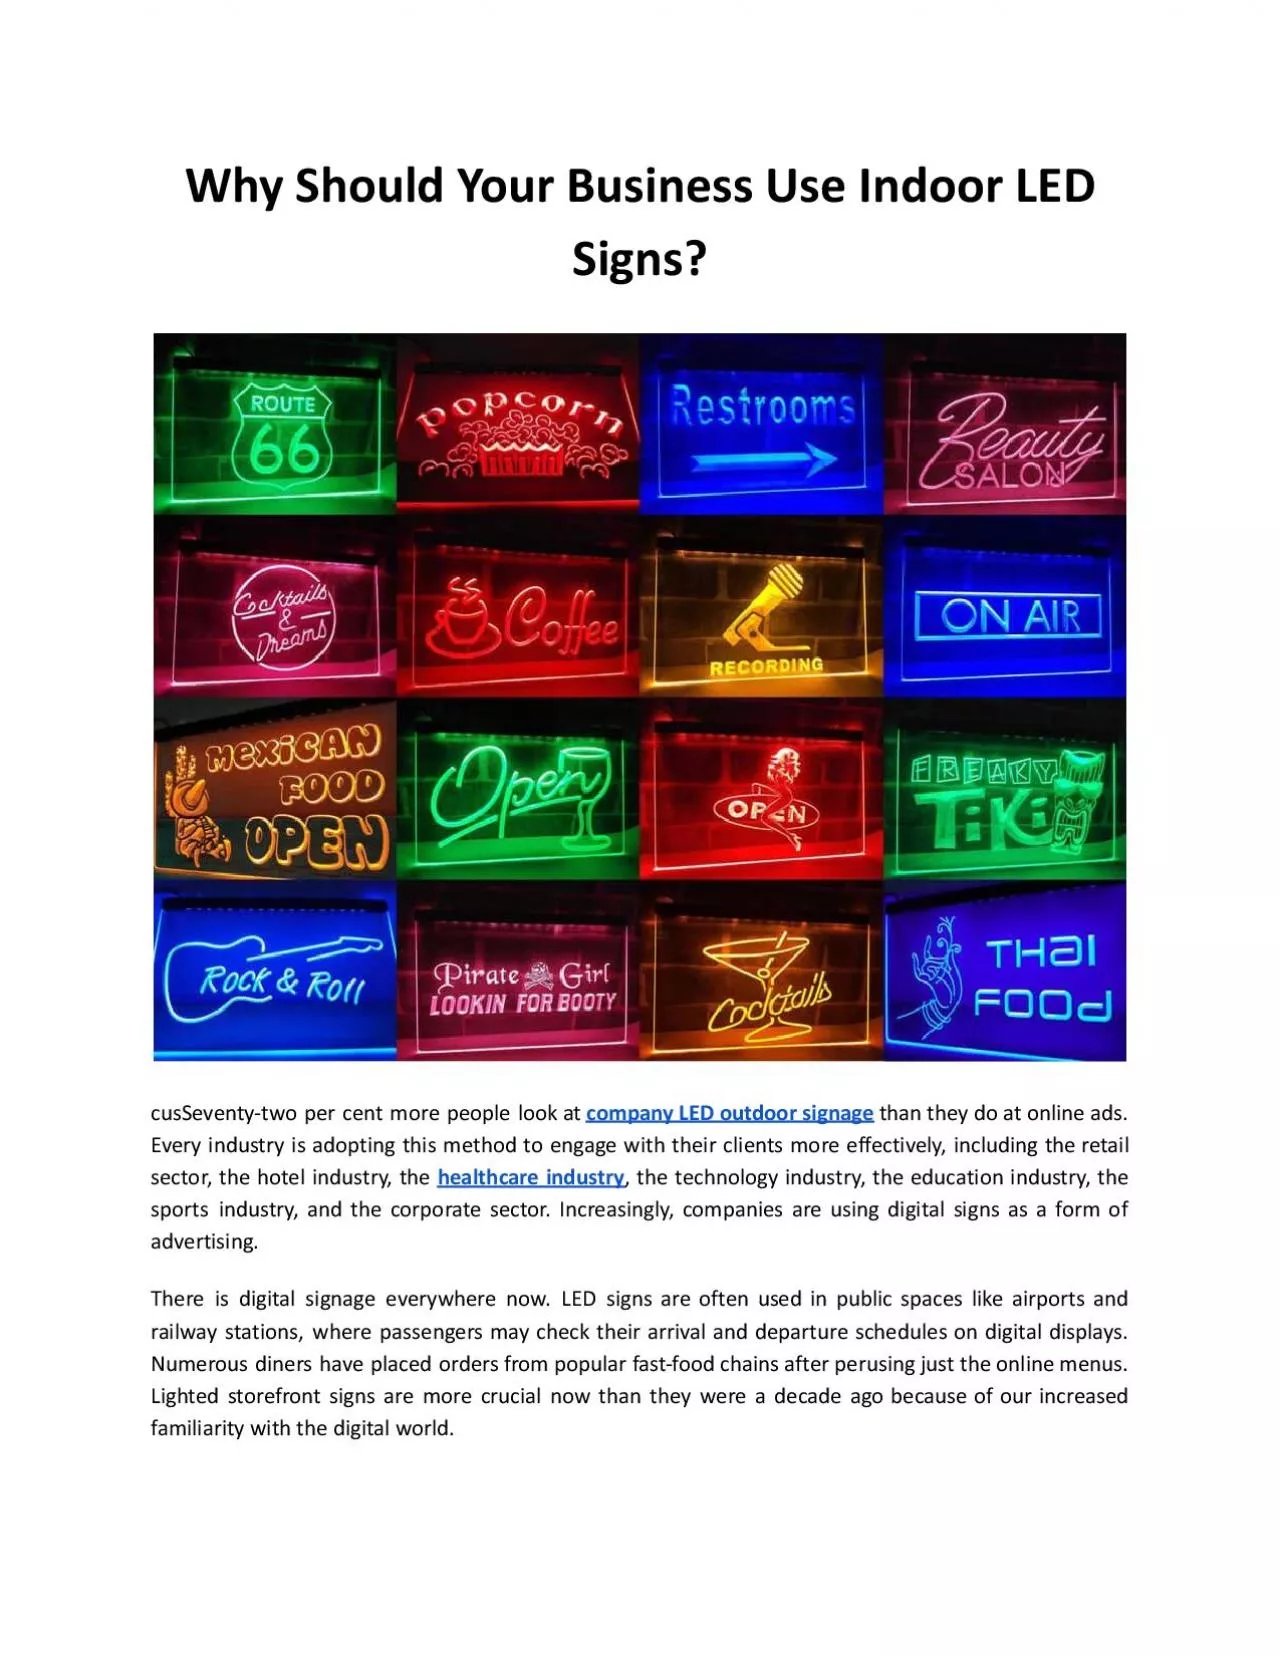 Why Should Your Business Use Indoor LED Signs - Iris Signs